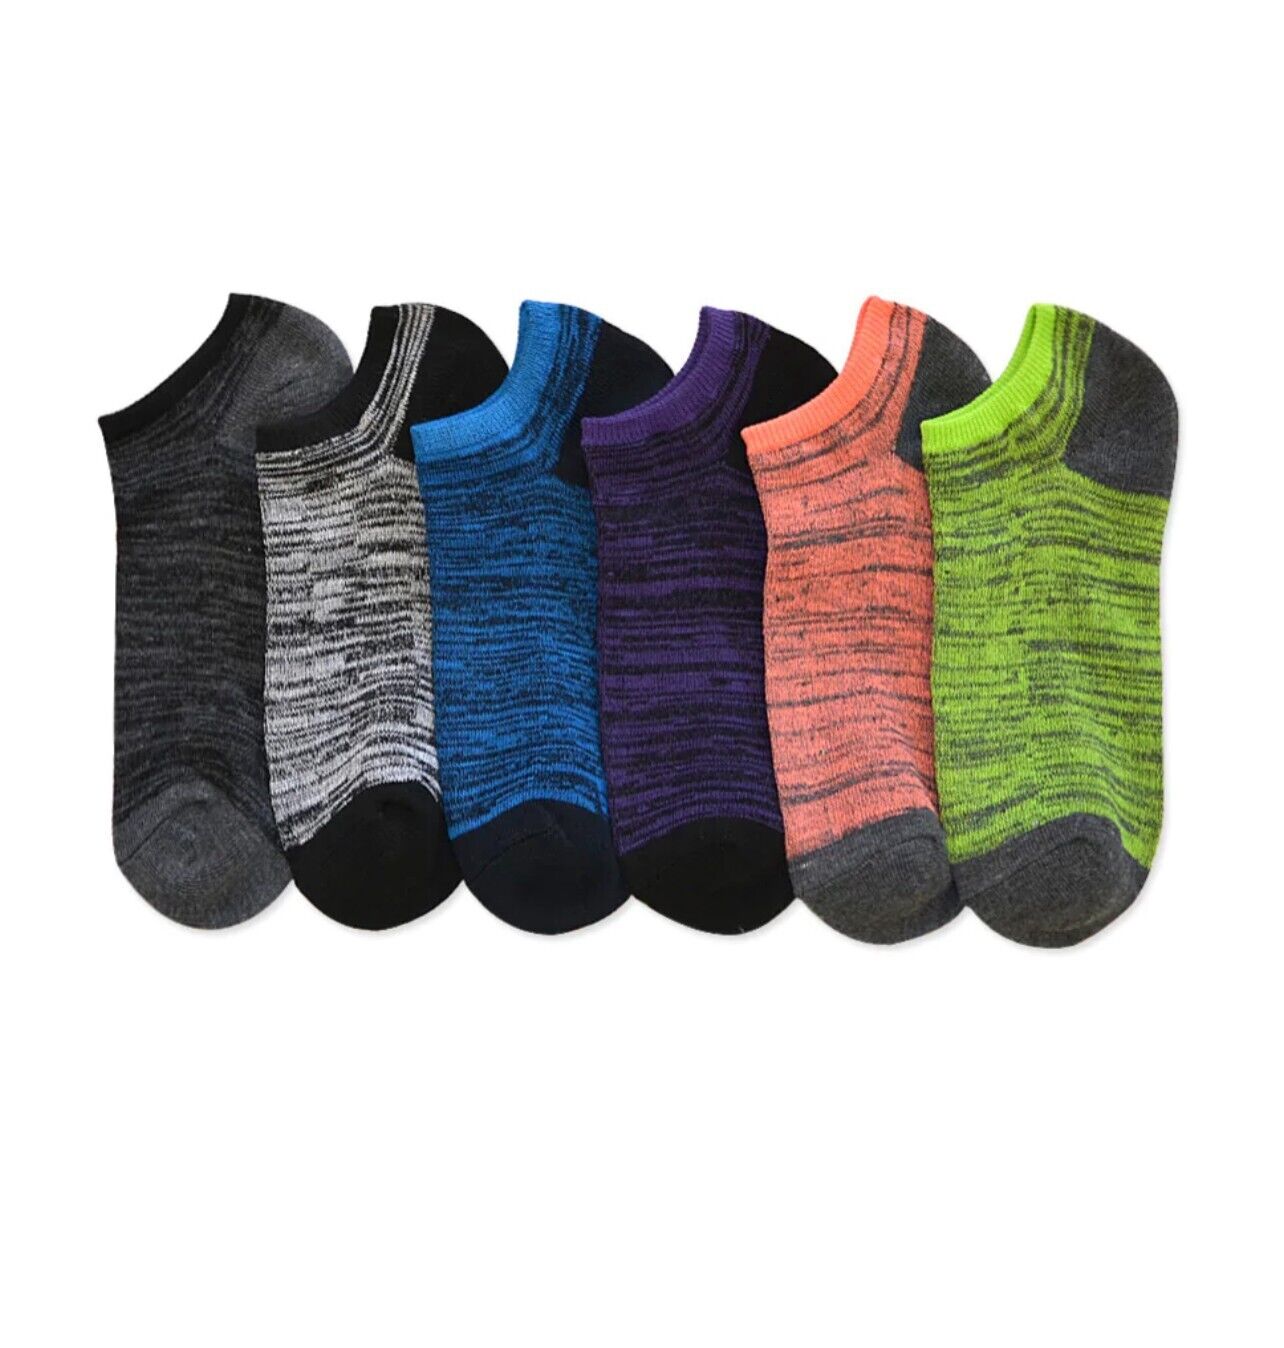 Lot 12 Pack Women's Low Cut Quarter Ankle Socks Sports Athletic No show 9-11 Unbranded